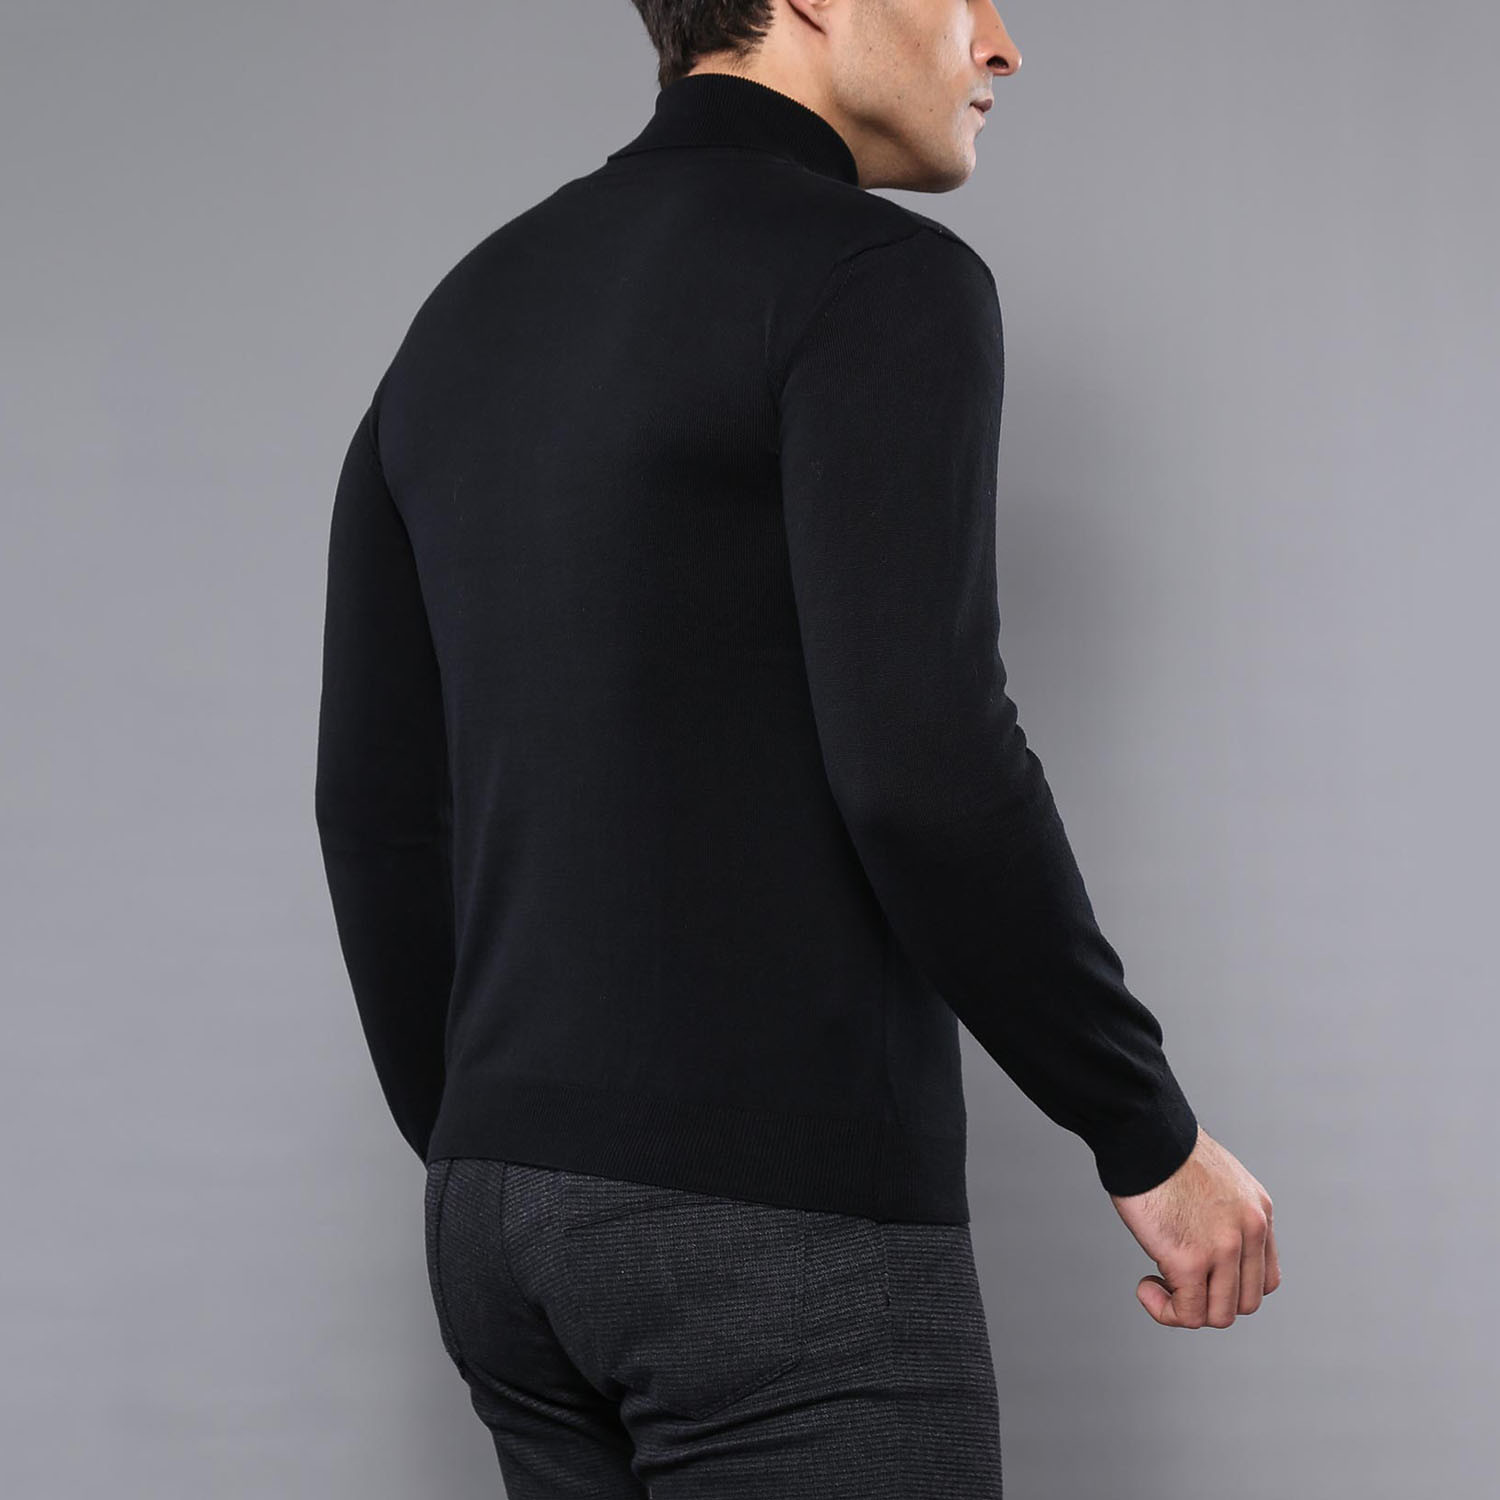 Christian Slim Fit Turtleneck Knit Sweater // Black (S) - Wessi - Touch ...